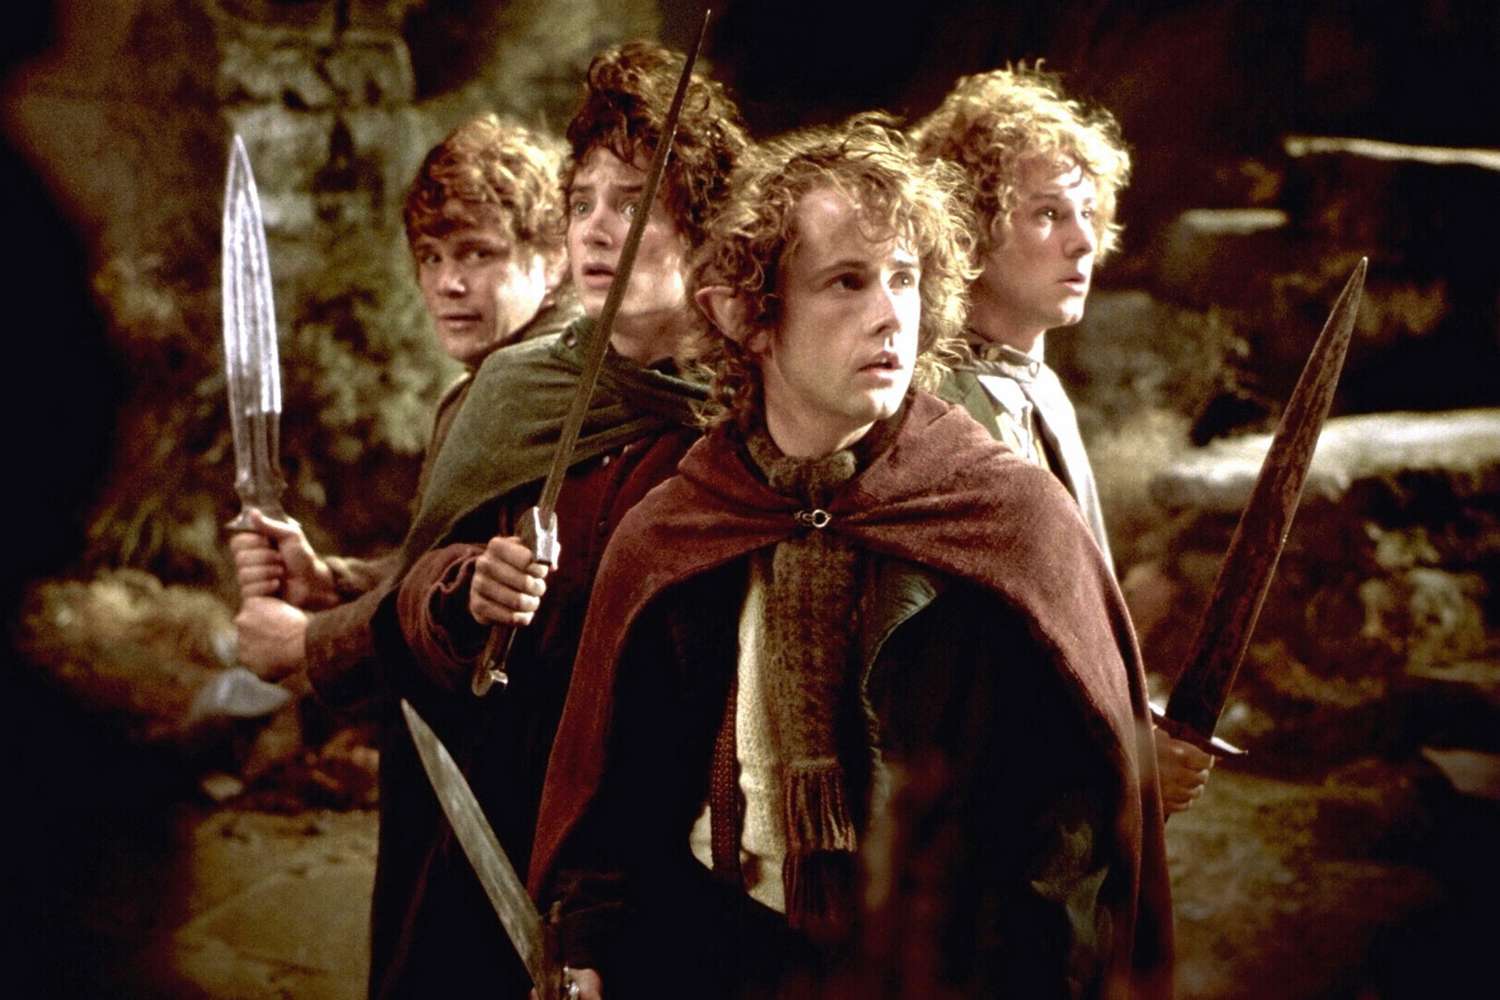 The One Ring Returns: Warner Bros. Announces New Lord Of The Rings Films